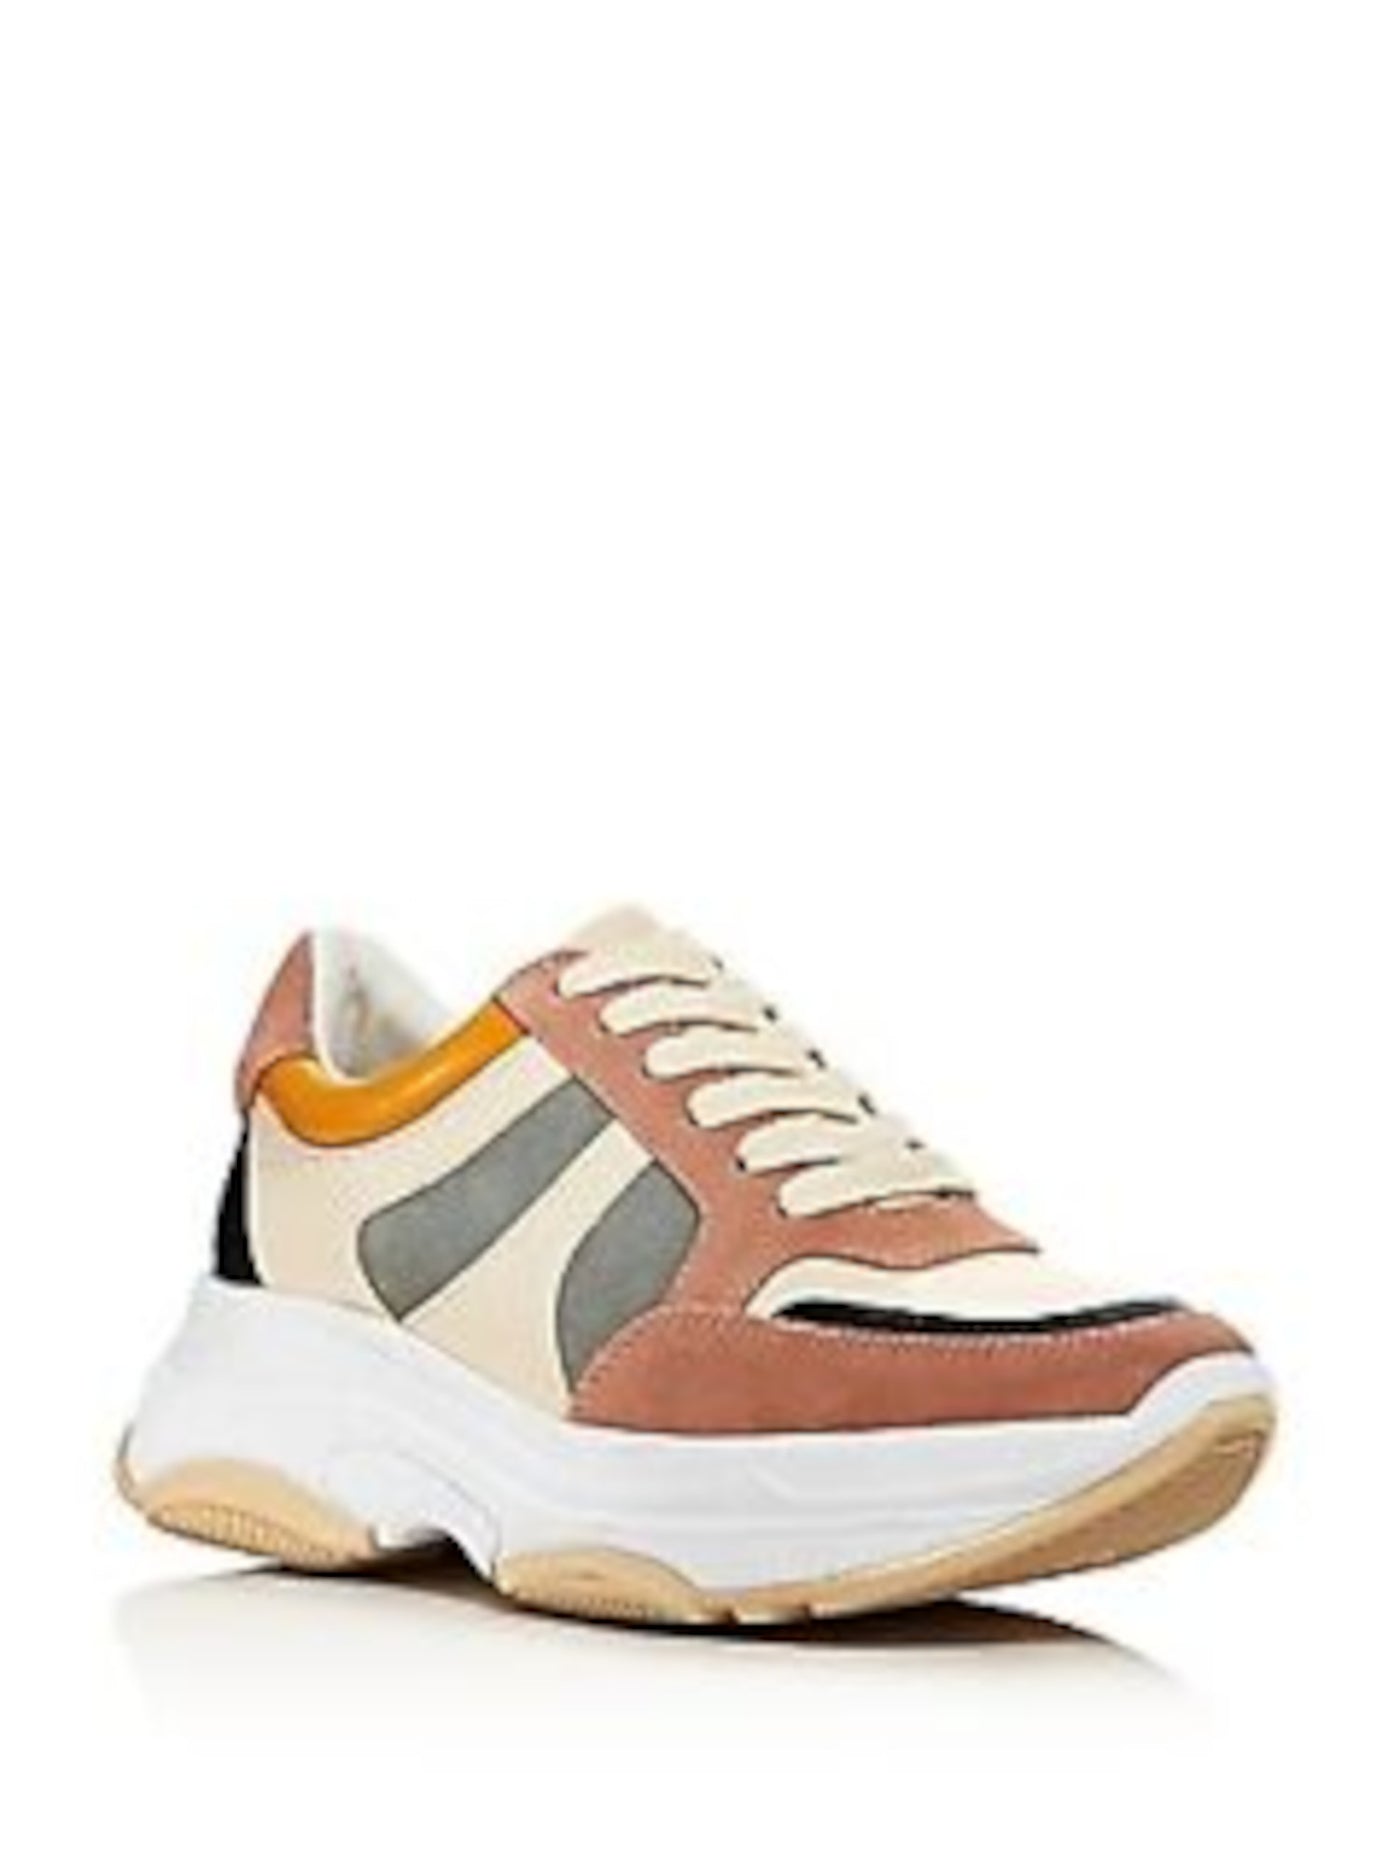 AQUA Womens Blush Multi Pink Mixed Media 1" Platform Cushioned Ike Round Toe Lace-Up Leather Athletic Sneakers 6.5